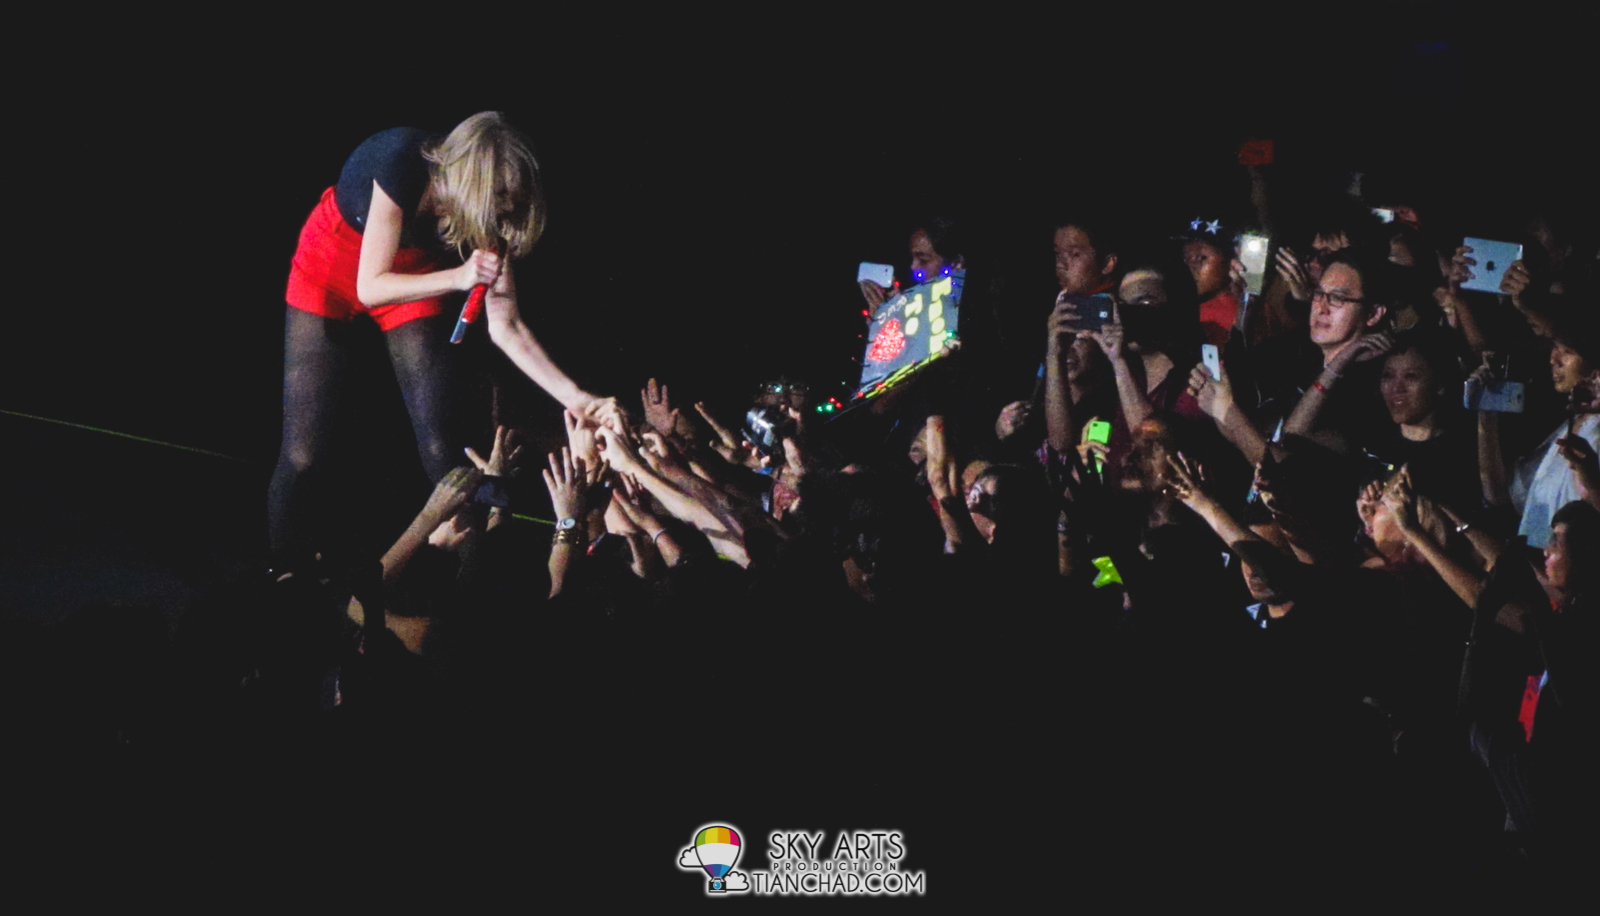 Taylor Swift has been very kind to interact with Malaysia fans frequently!!